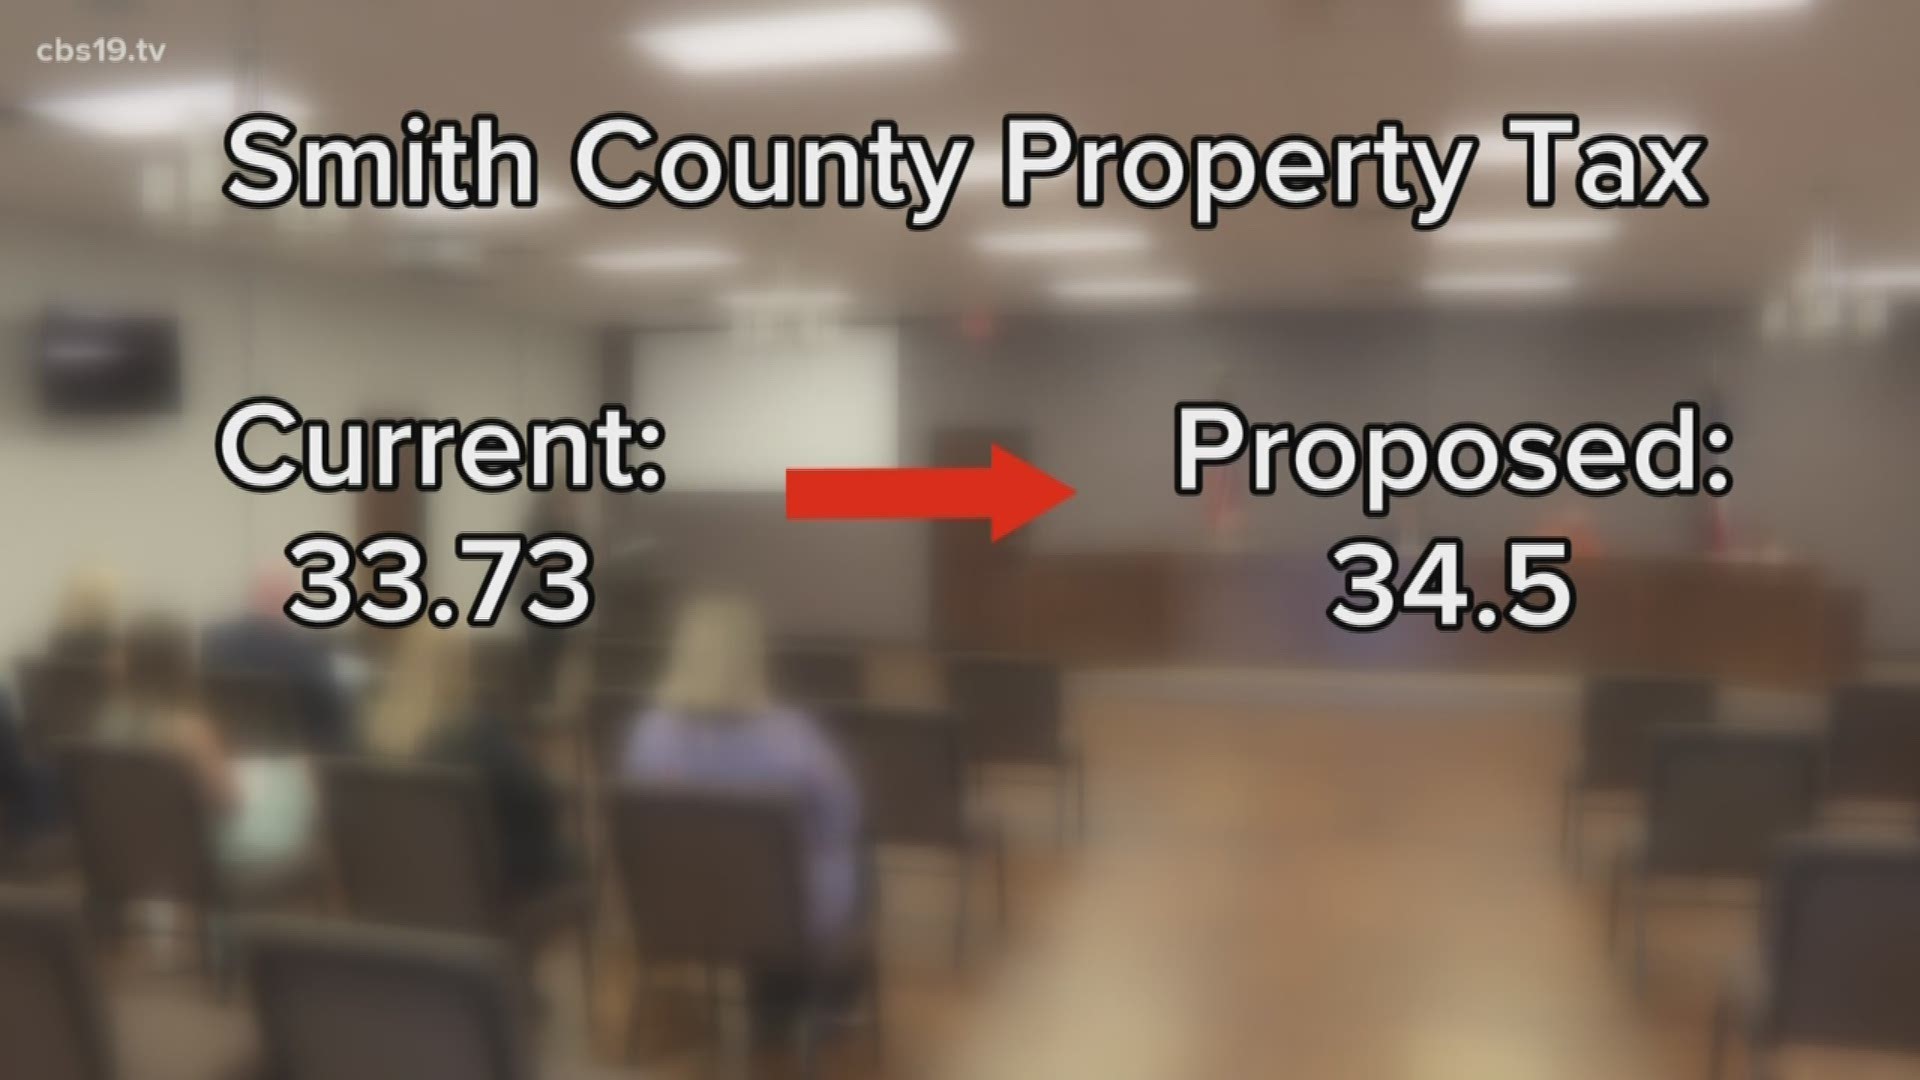 During a public hearing, August 13, two residents spoke to Smith County Commissioners about their opinion on the fiscal year 2019-2020 budget and proposed property tax increase.